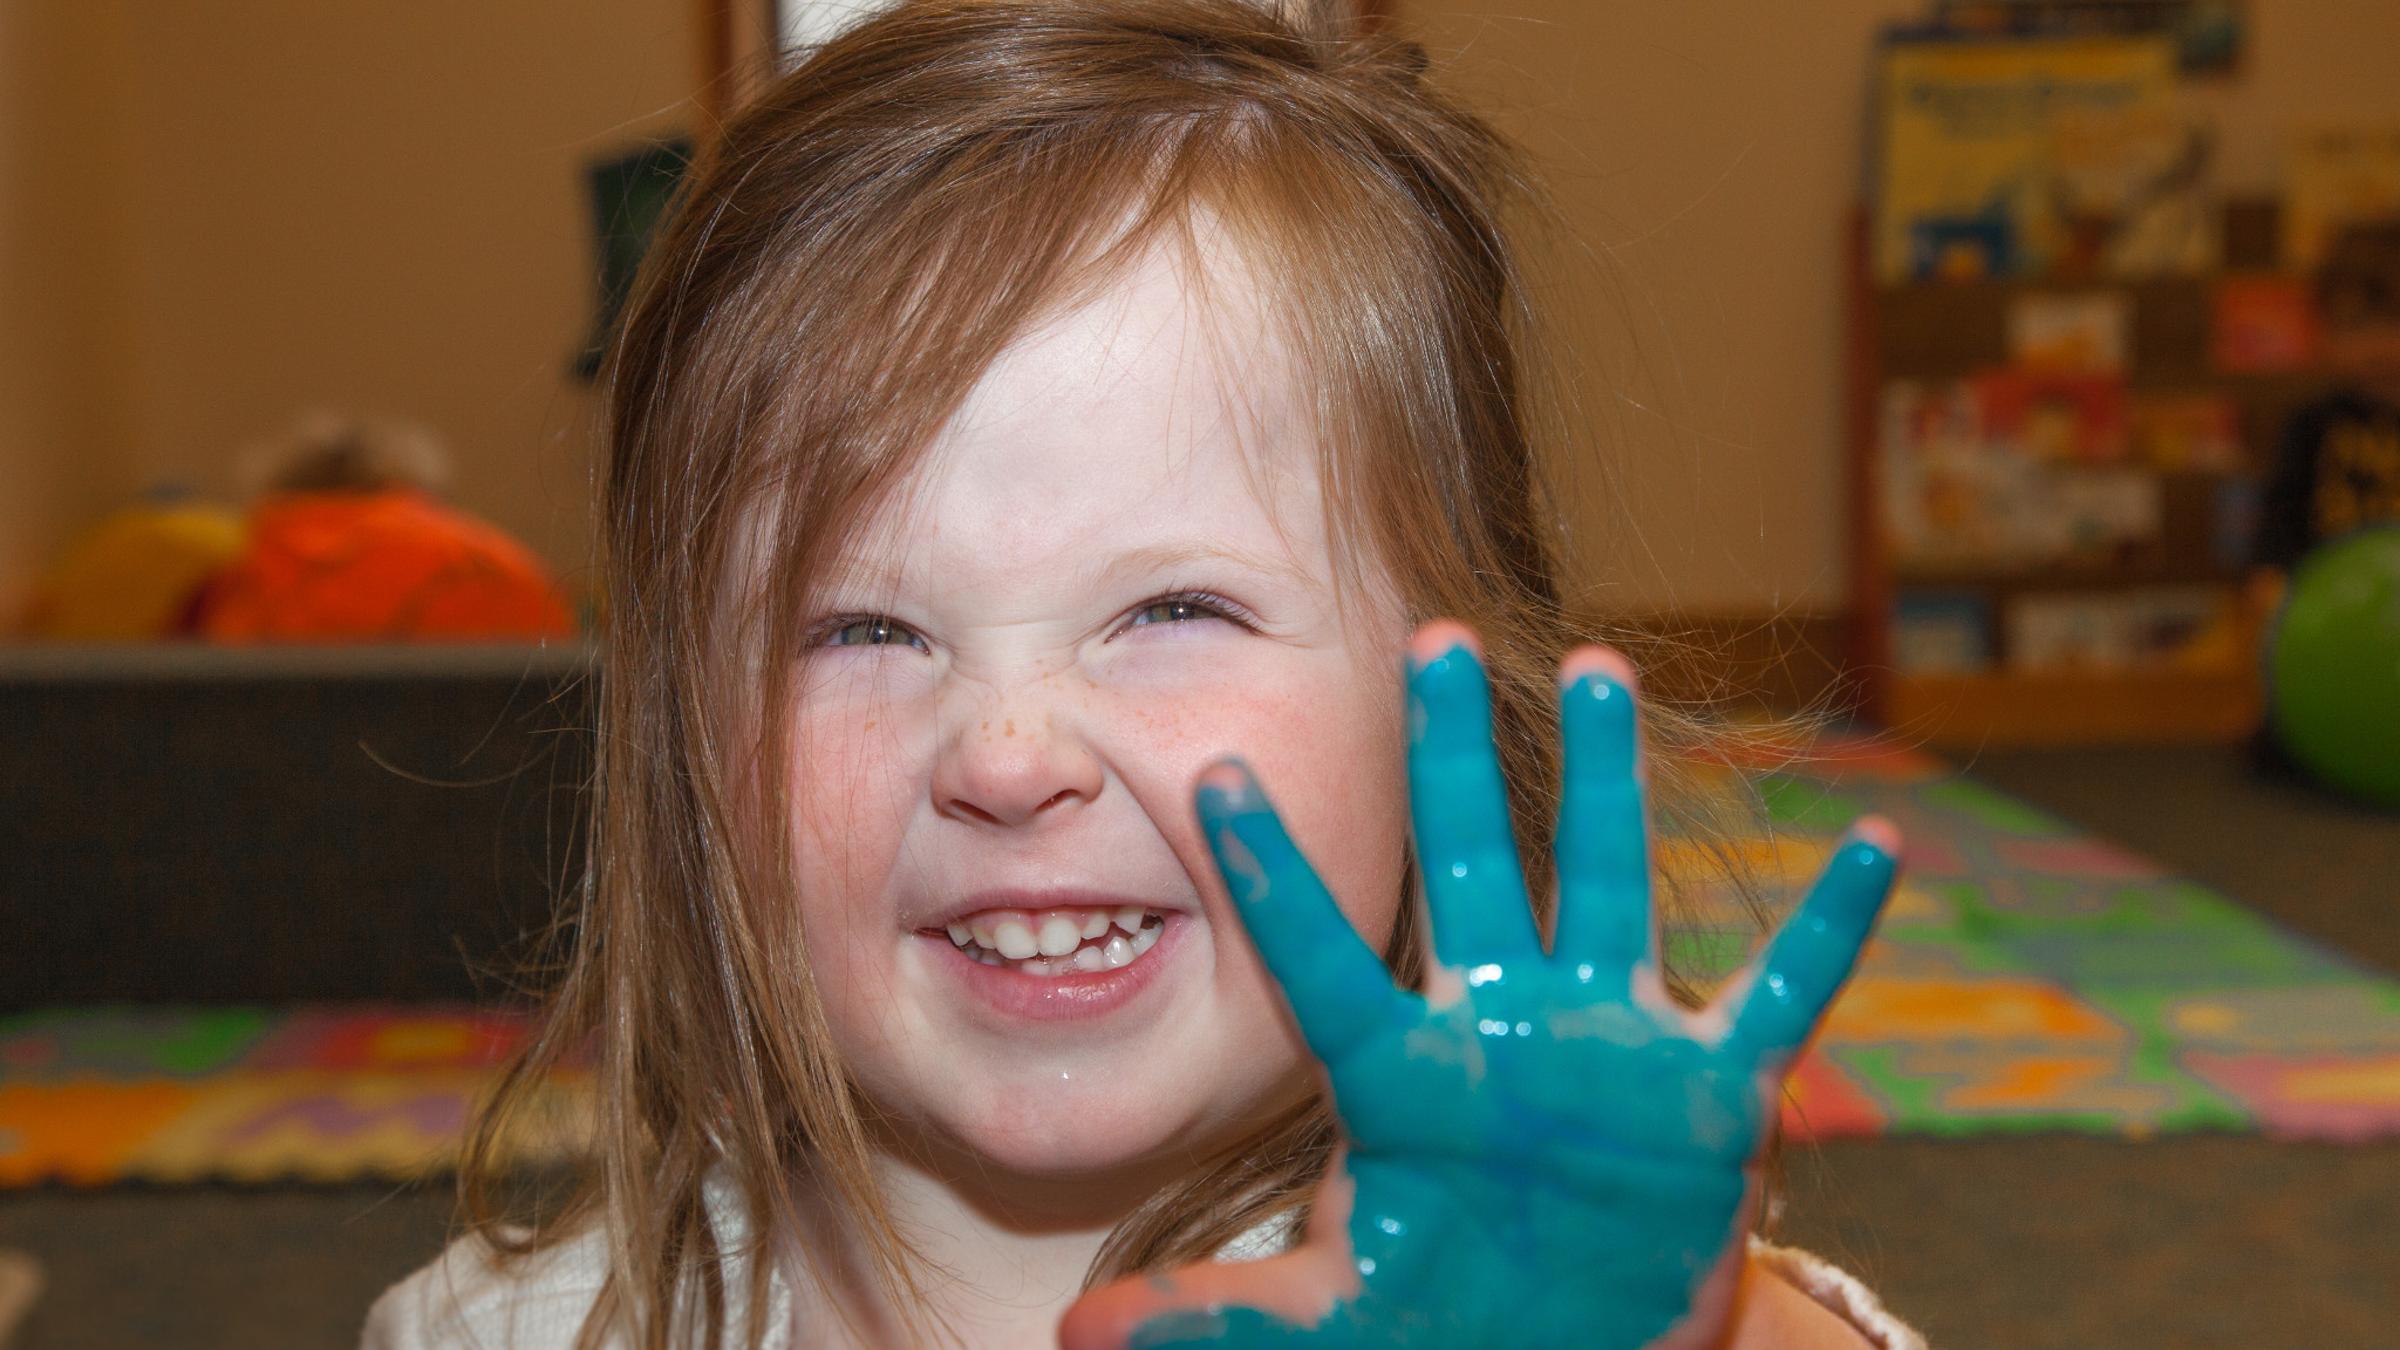 Young girl with a hand covered in blue paint